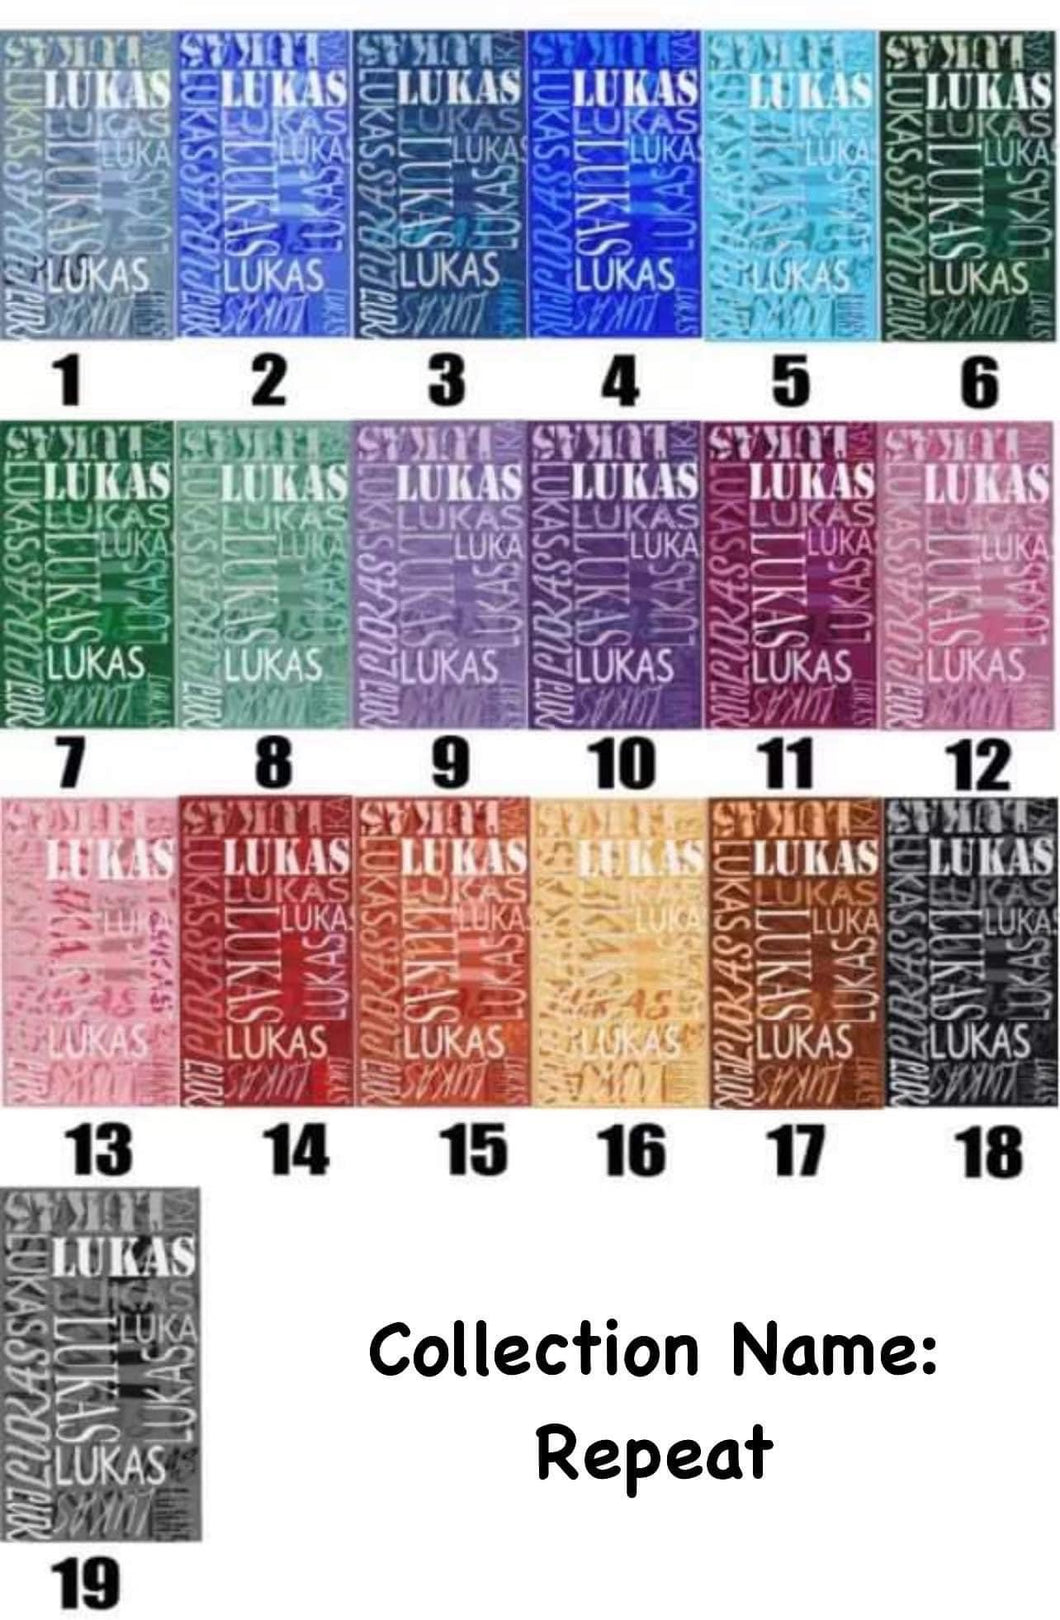 Personalized Beach Towels Repeat - Please specify Name, Color and Font